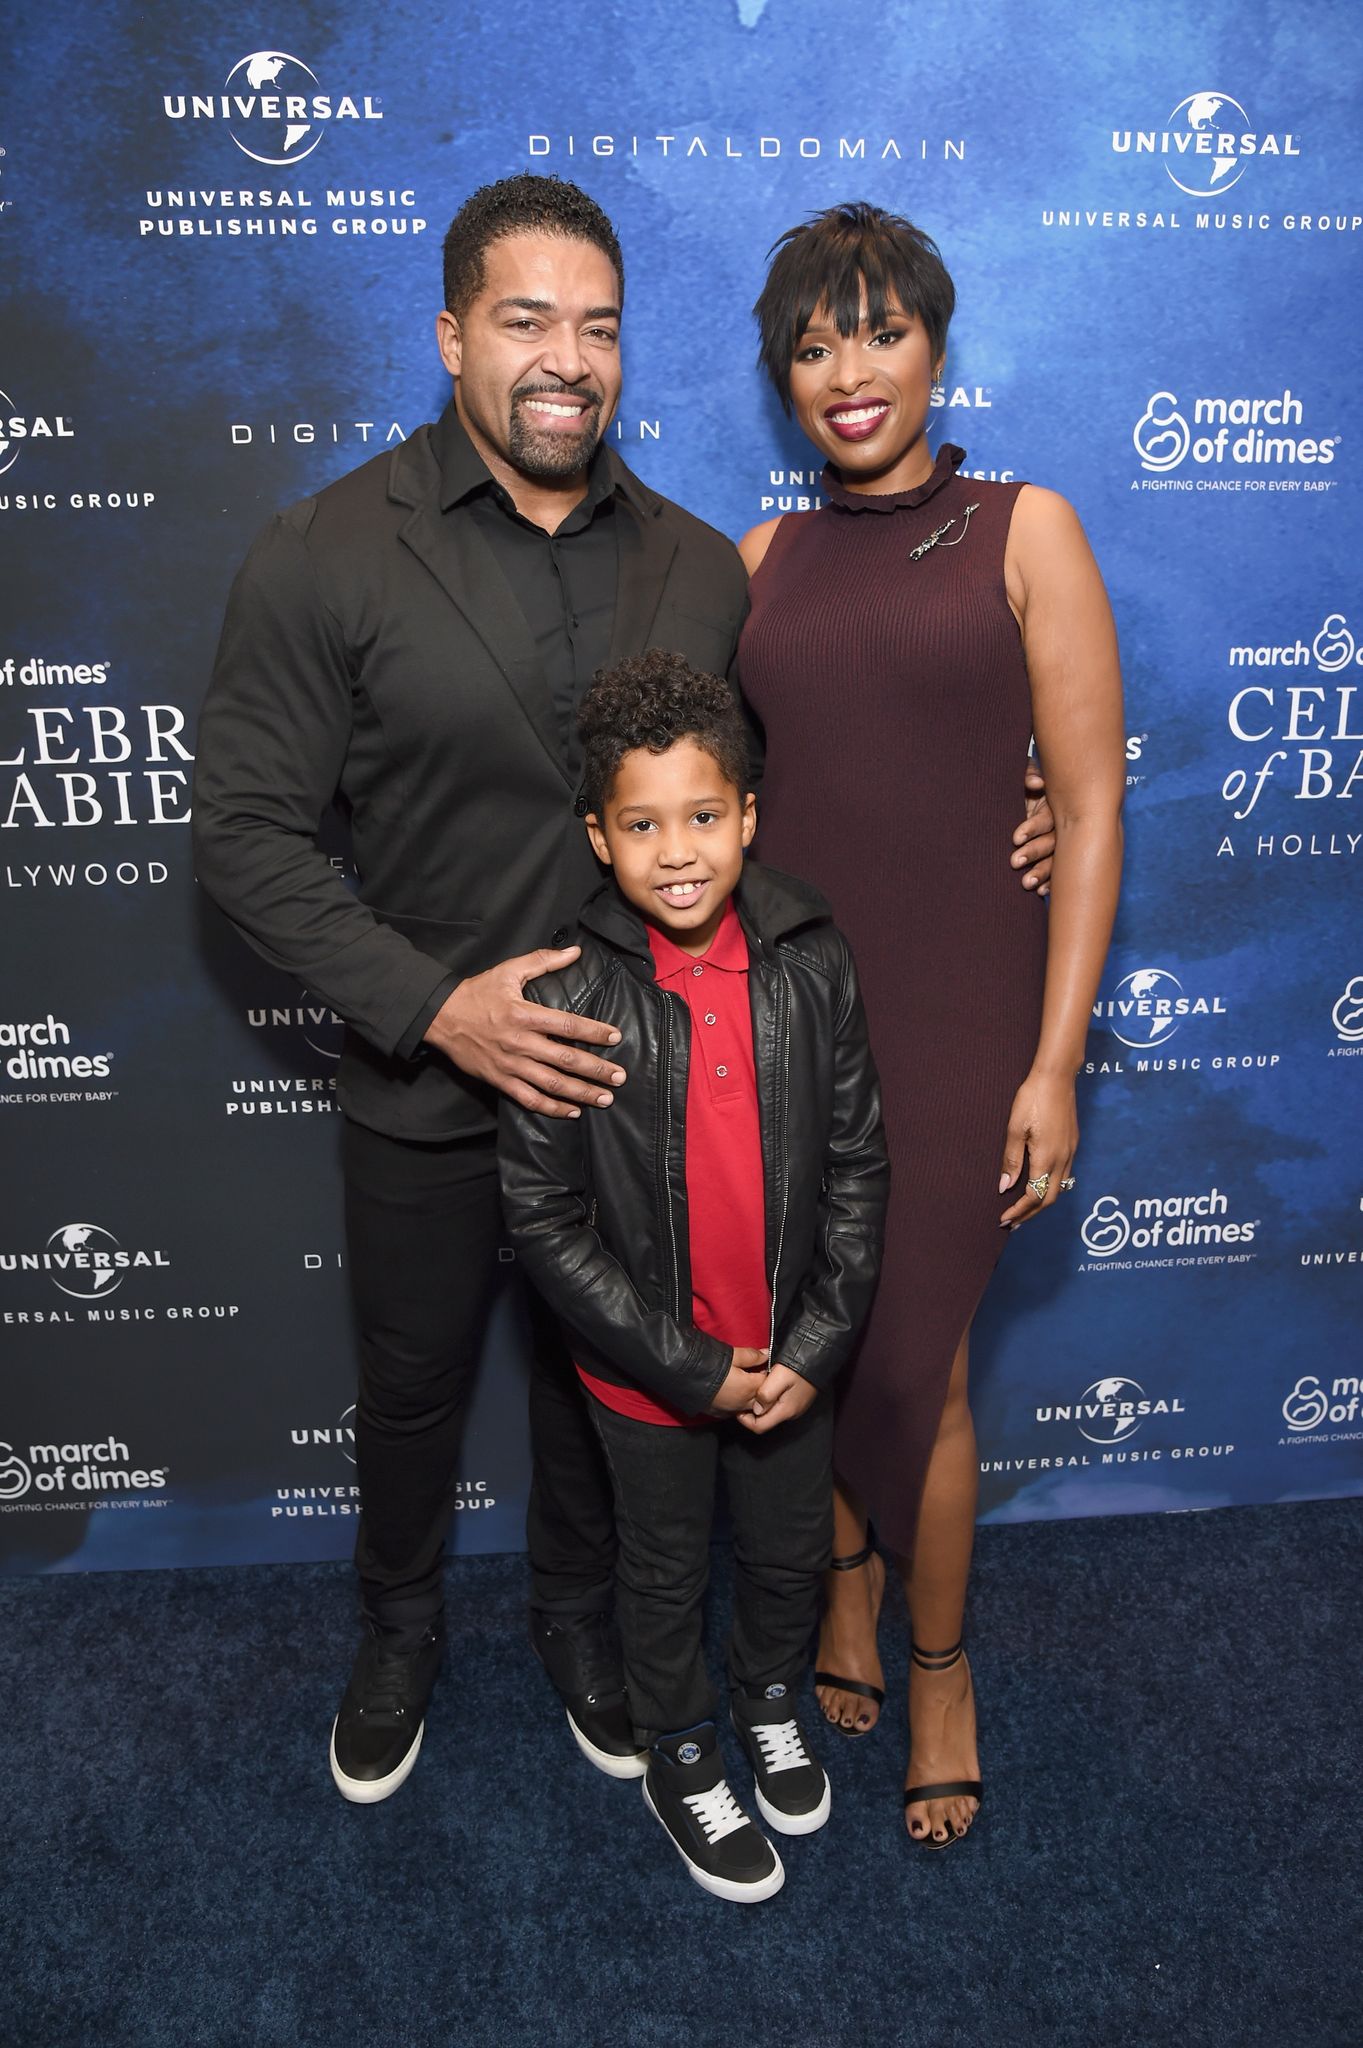 Singer Jennifer Hudson, David Otunga, and David Jr. at the March of Dimes Celebration of Babies on December 9, 2016 in Beverly Hills | Photo: Getty Images